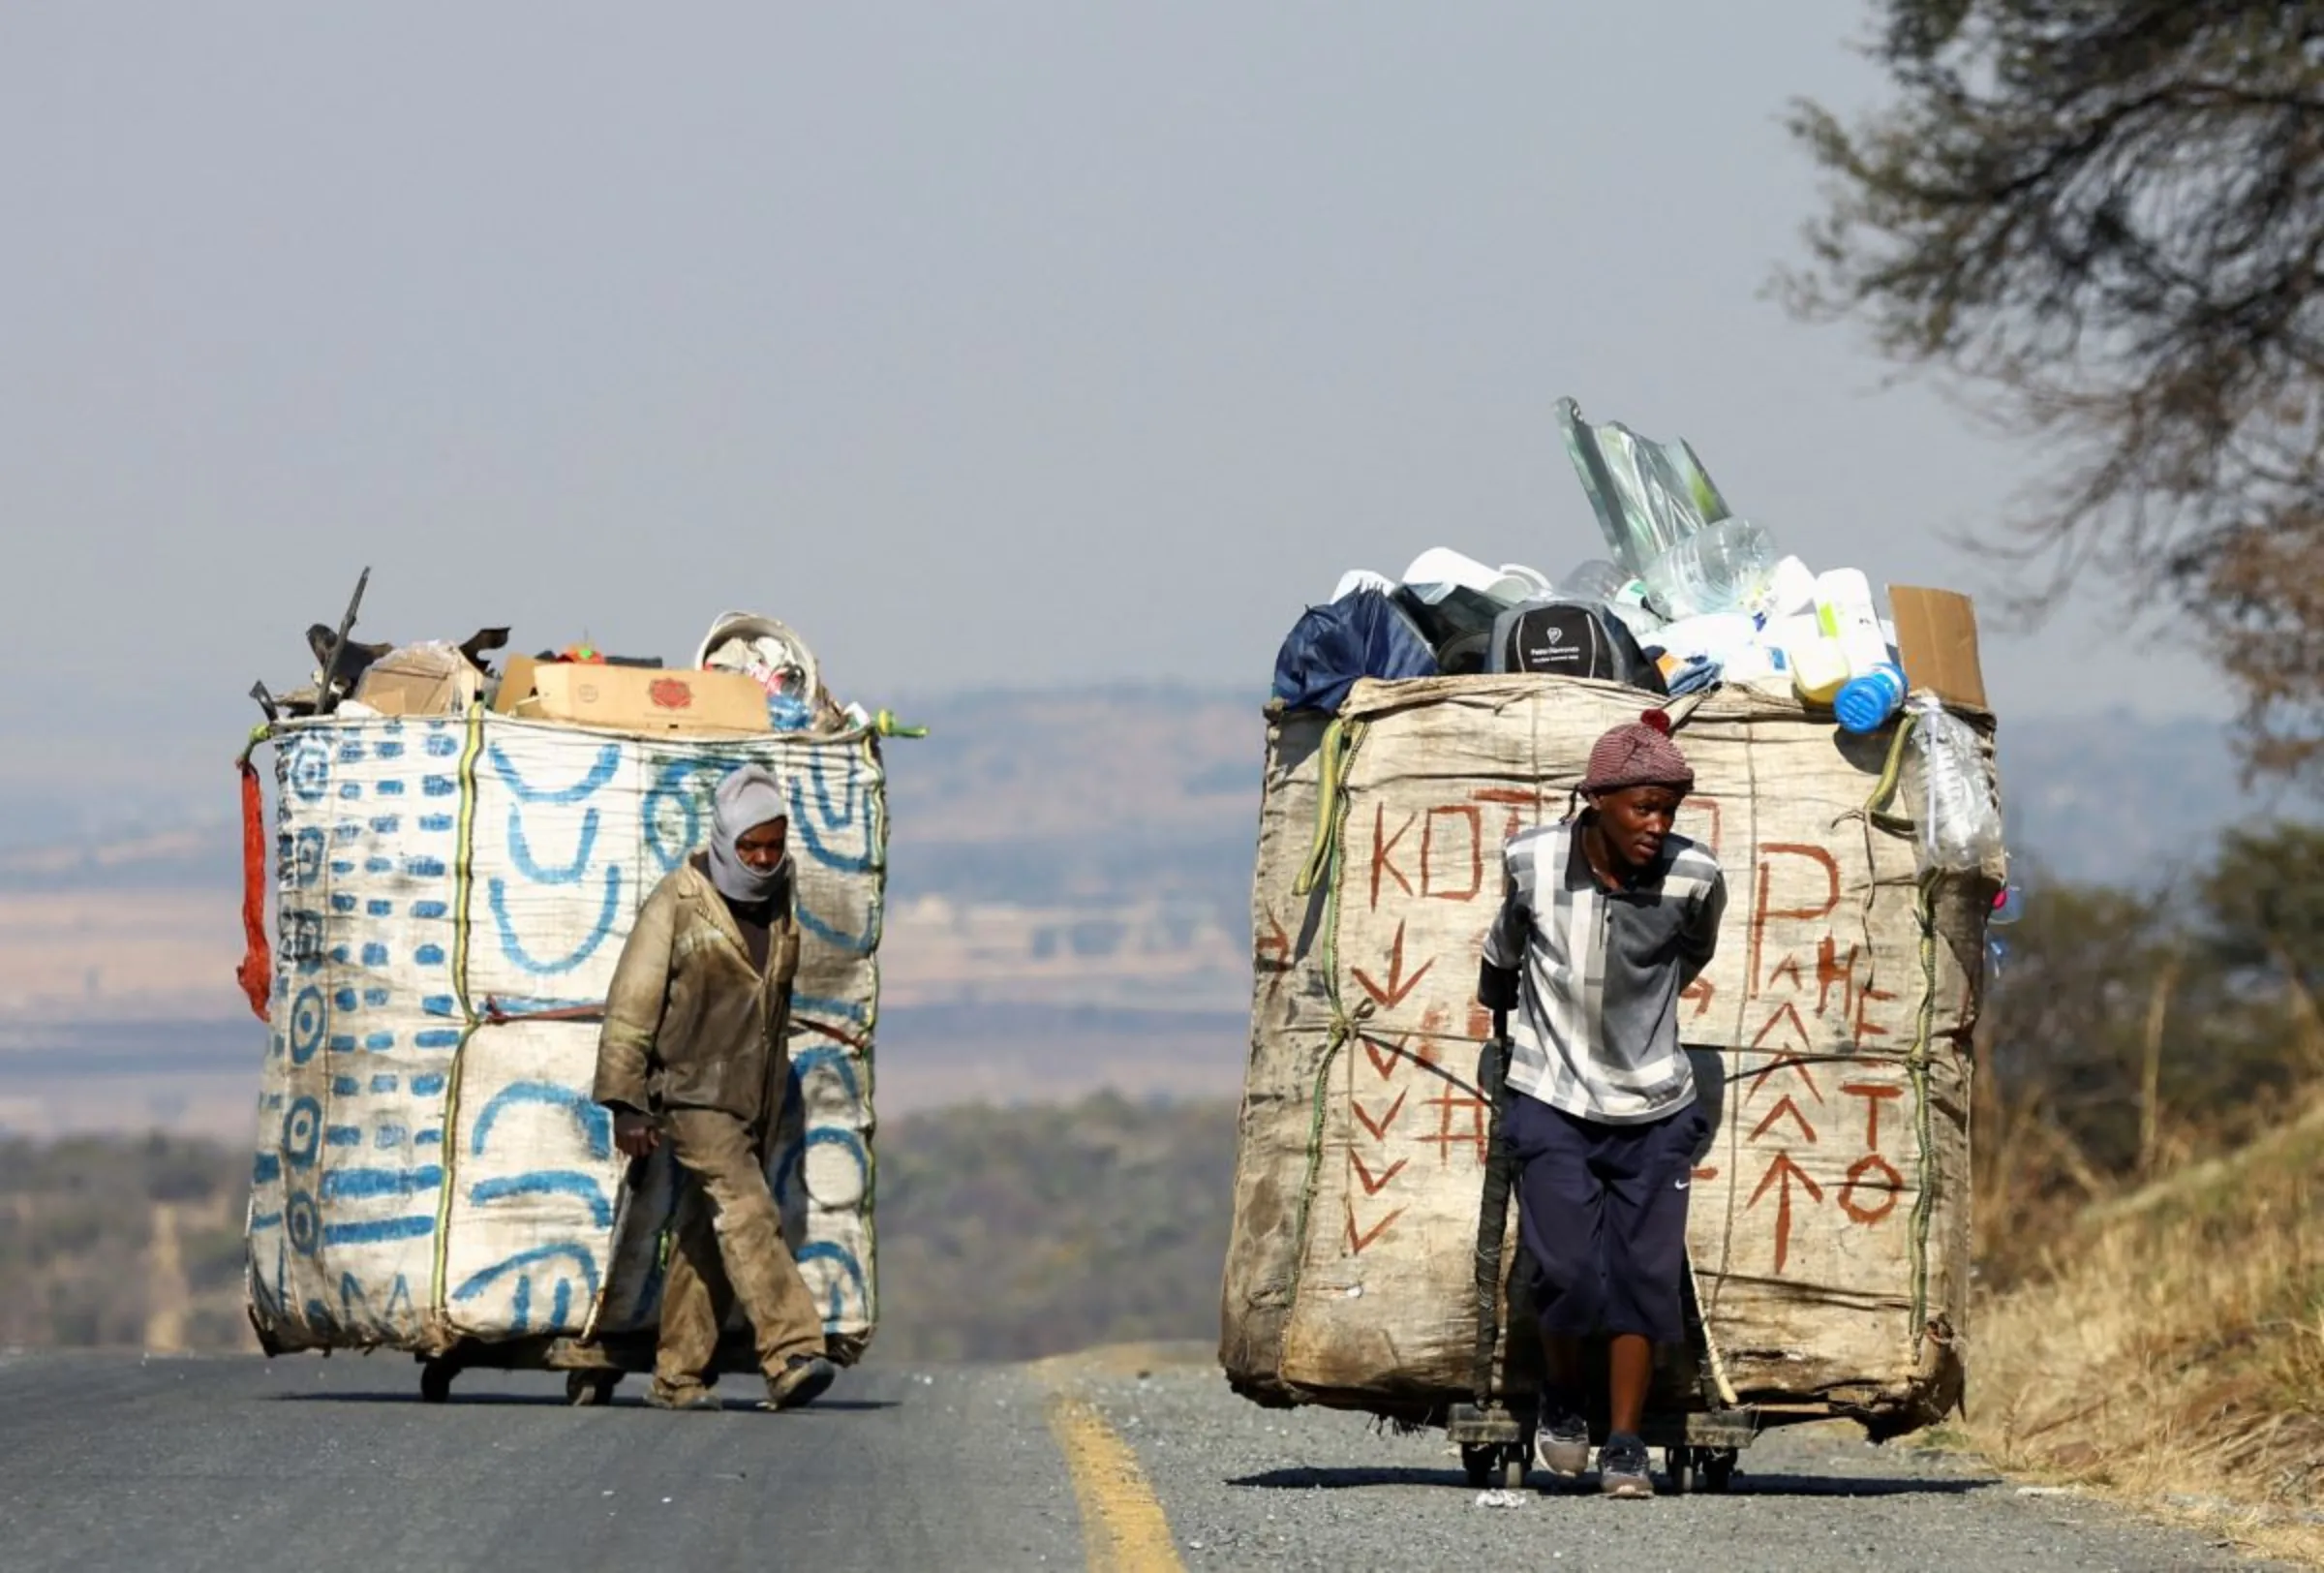 Steven Lesoona and Thabang Pule, waste pickers, pull trolleys loaded with recyclable materials, as they combat unemployment in Naturena, near Johannesburg, South Africa, July 3, 2023. REUTERS/Siphiwe Sibeko